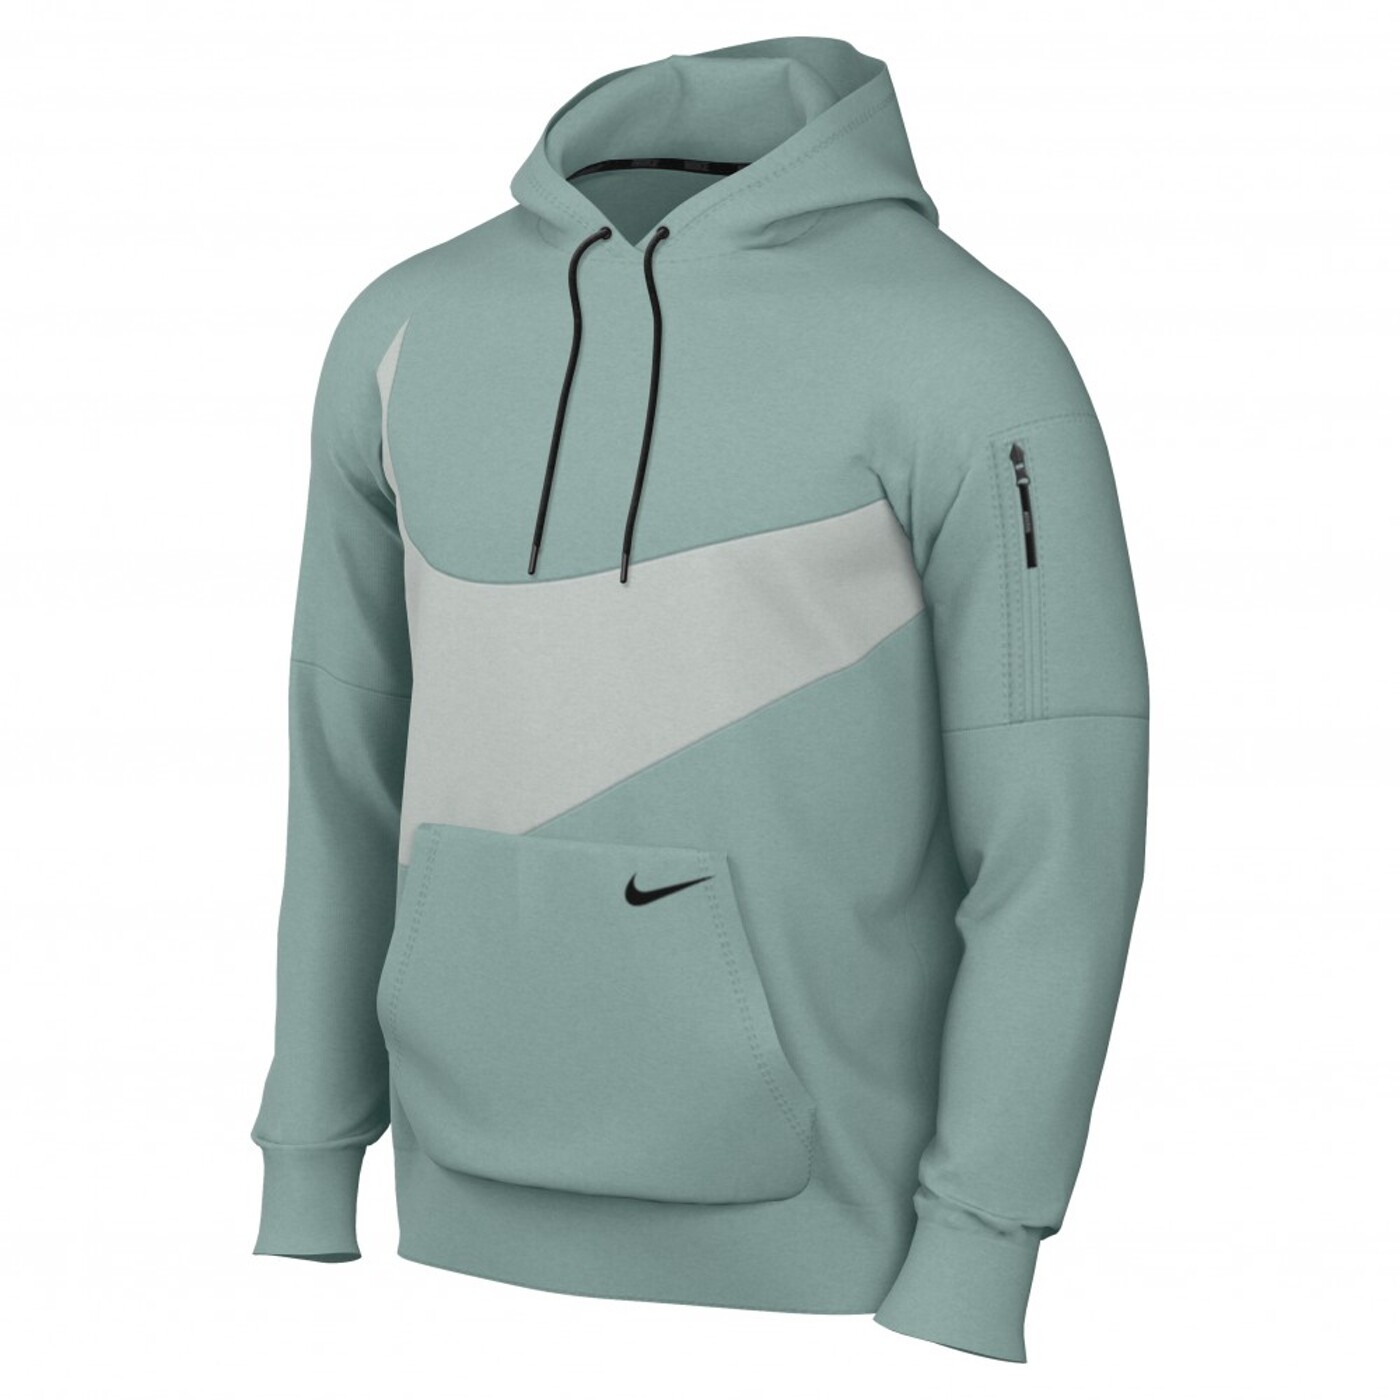 Nike Therma-FIT Pullover - Herren